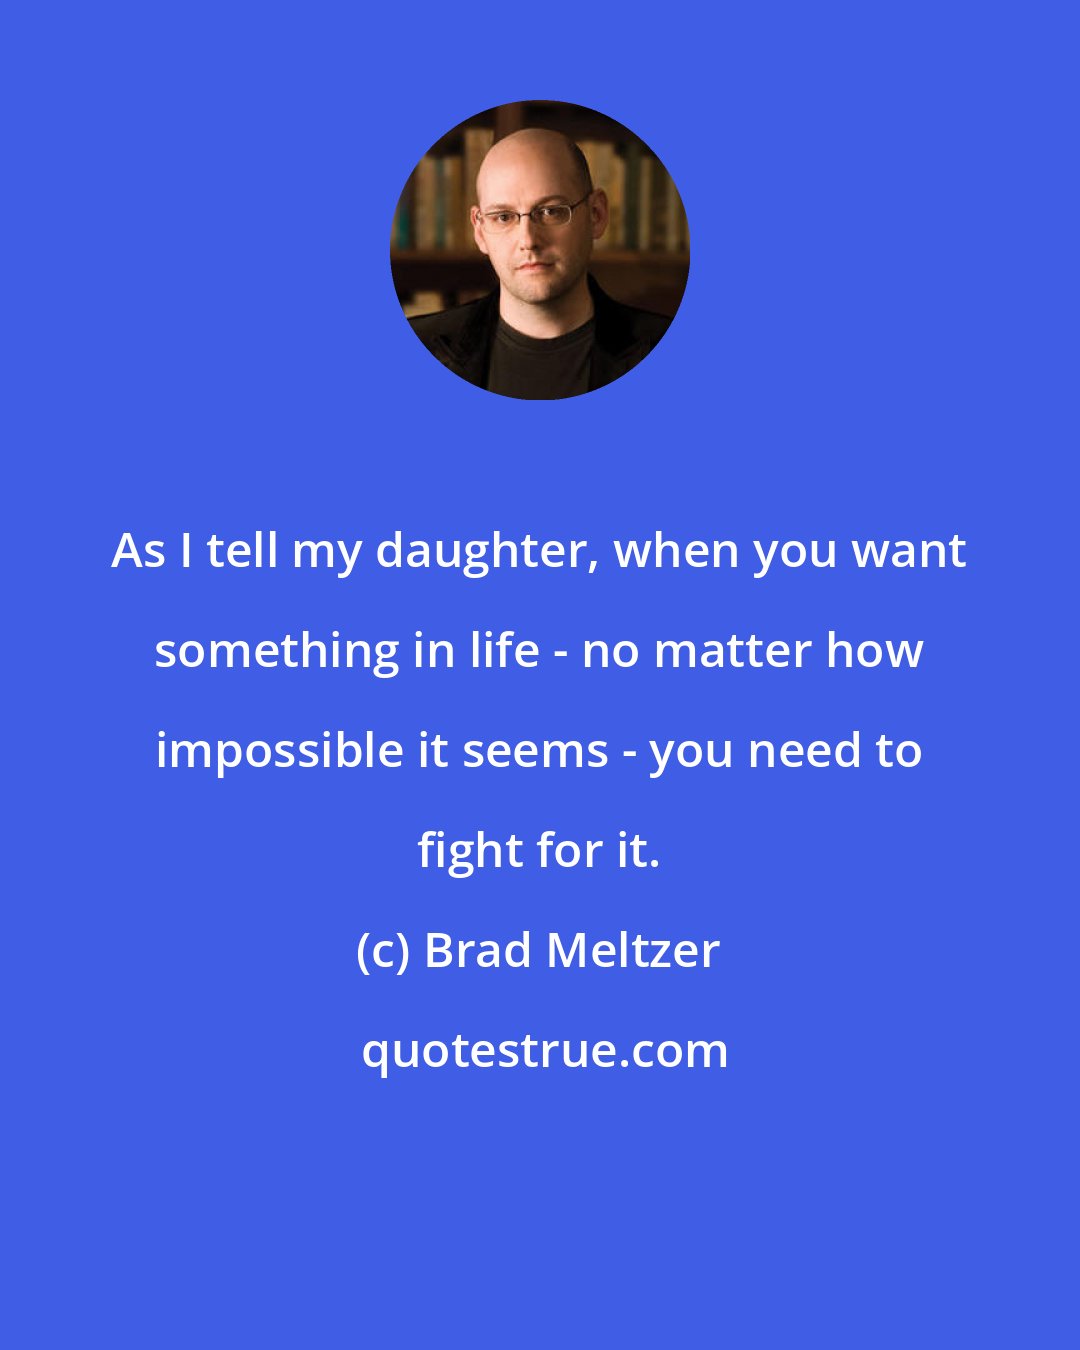 Brad Meltzer: As I tell my daughter, when you want something in life - no matter how impossible it seems - you need to fight for it.